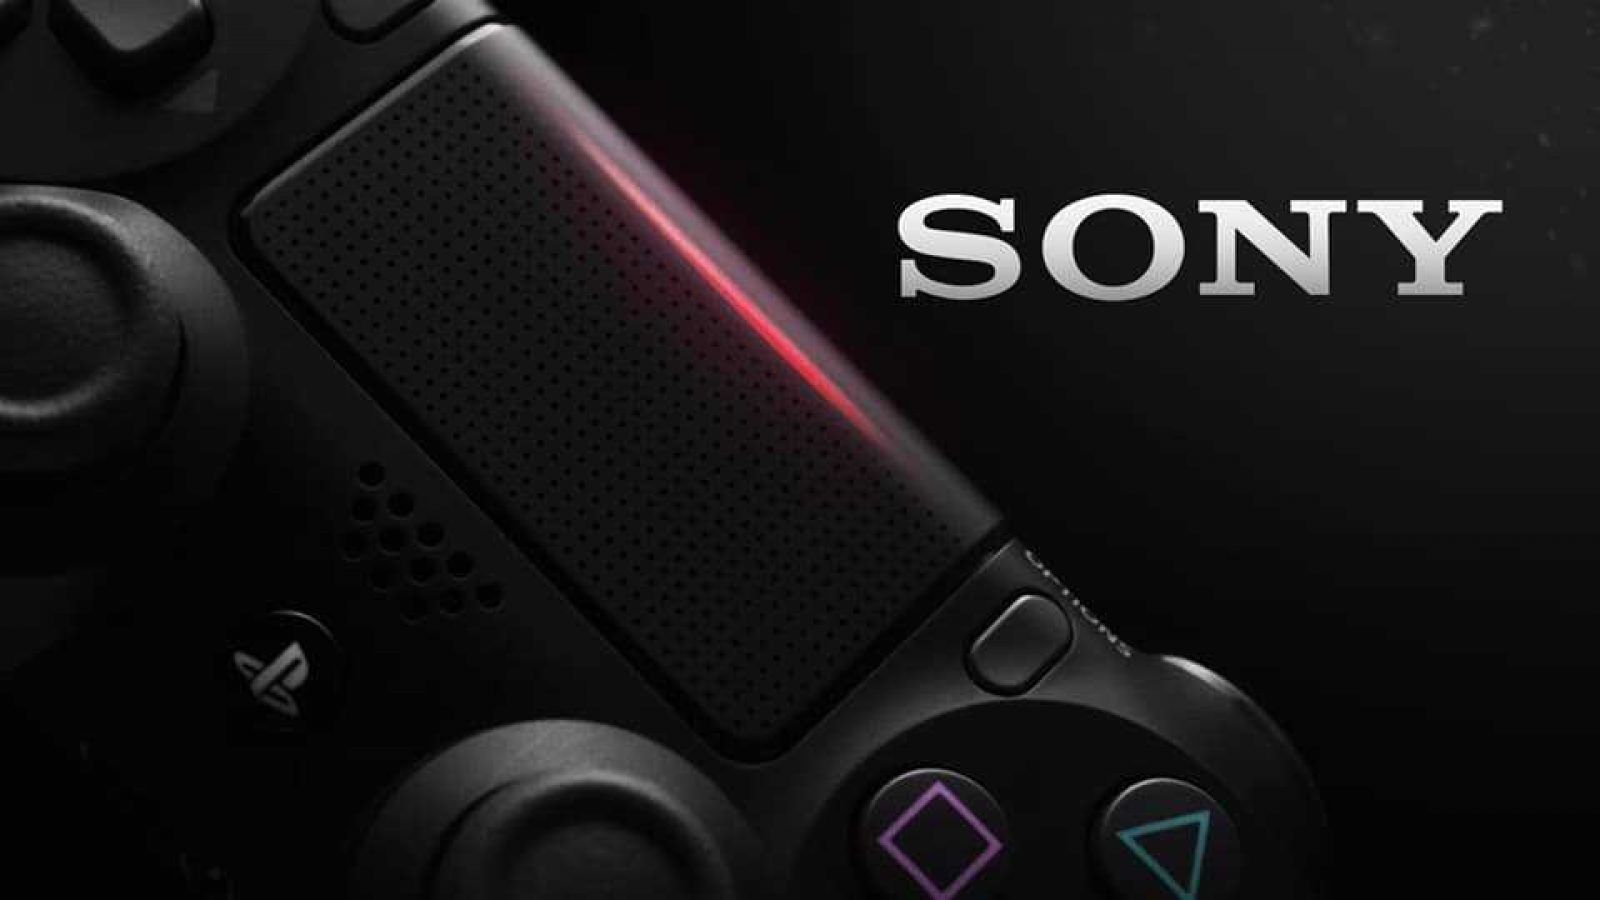 Sony reveal impressive new details about the PS5 console